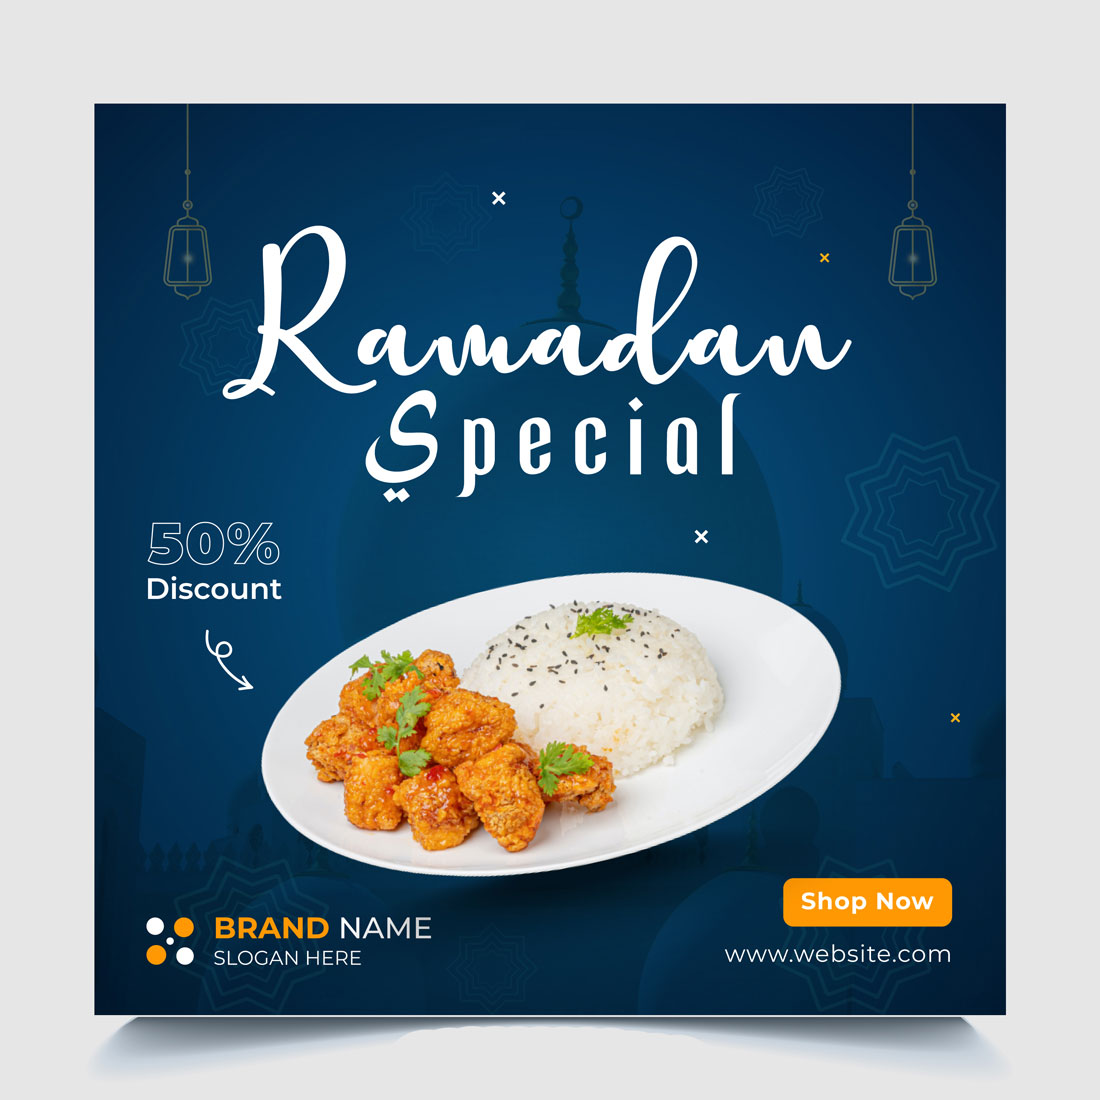 Poster for raman special with a picture of a plate of food.